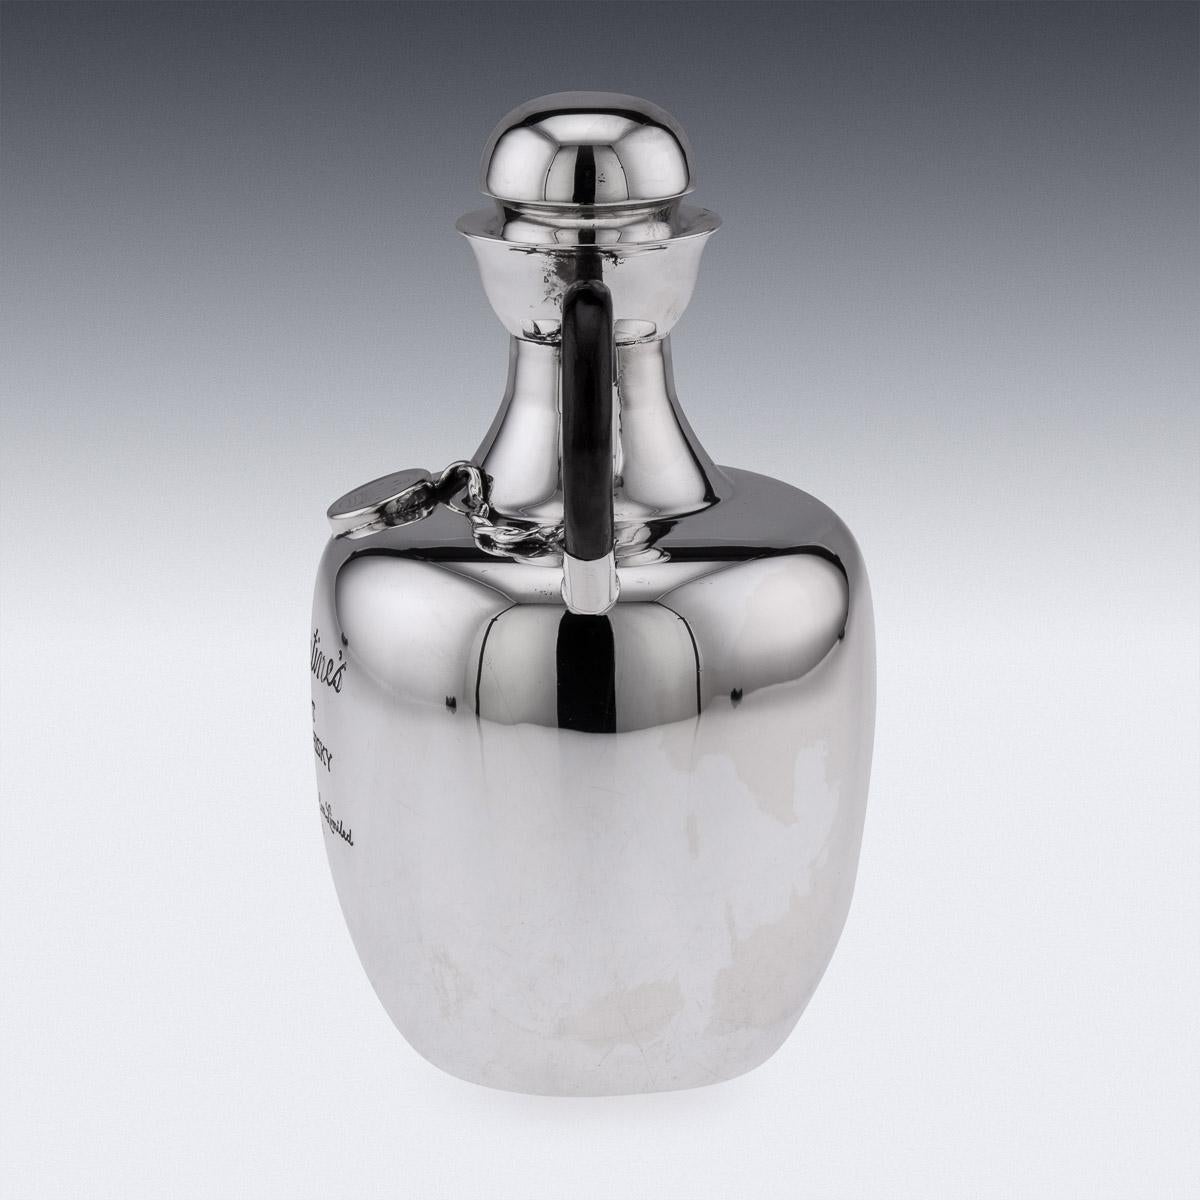 20th Century Italian silver whisky decanter. Mounted with a C-shaped ebonised handle and removable lid. The plain decanter engraved 